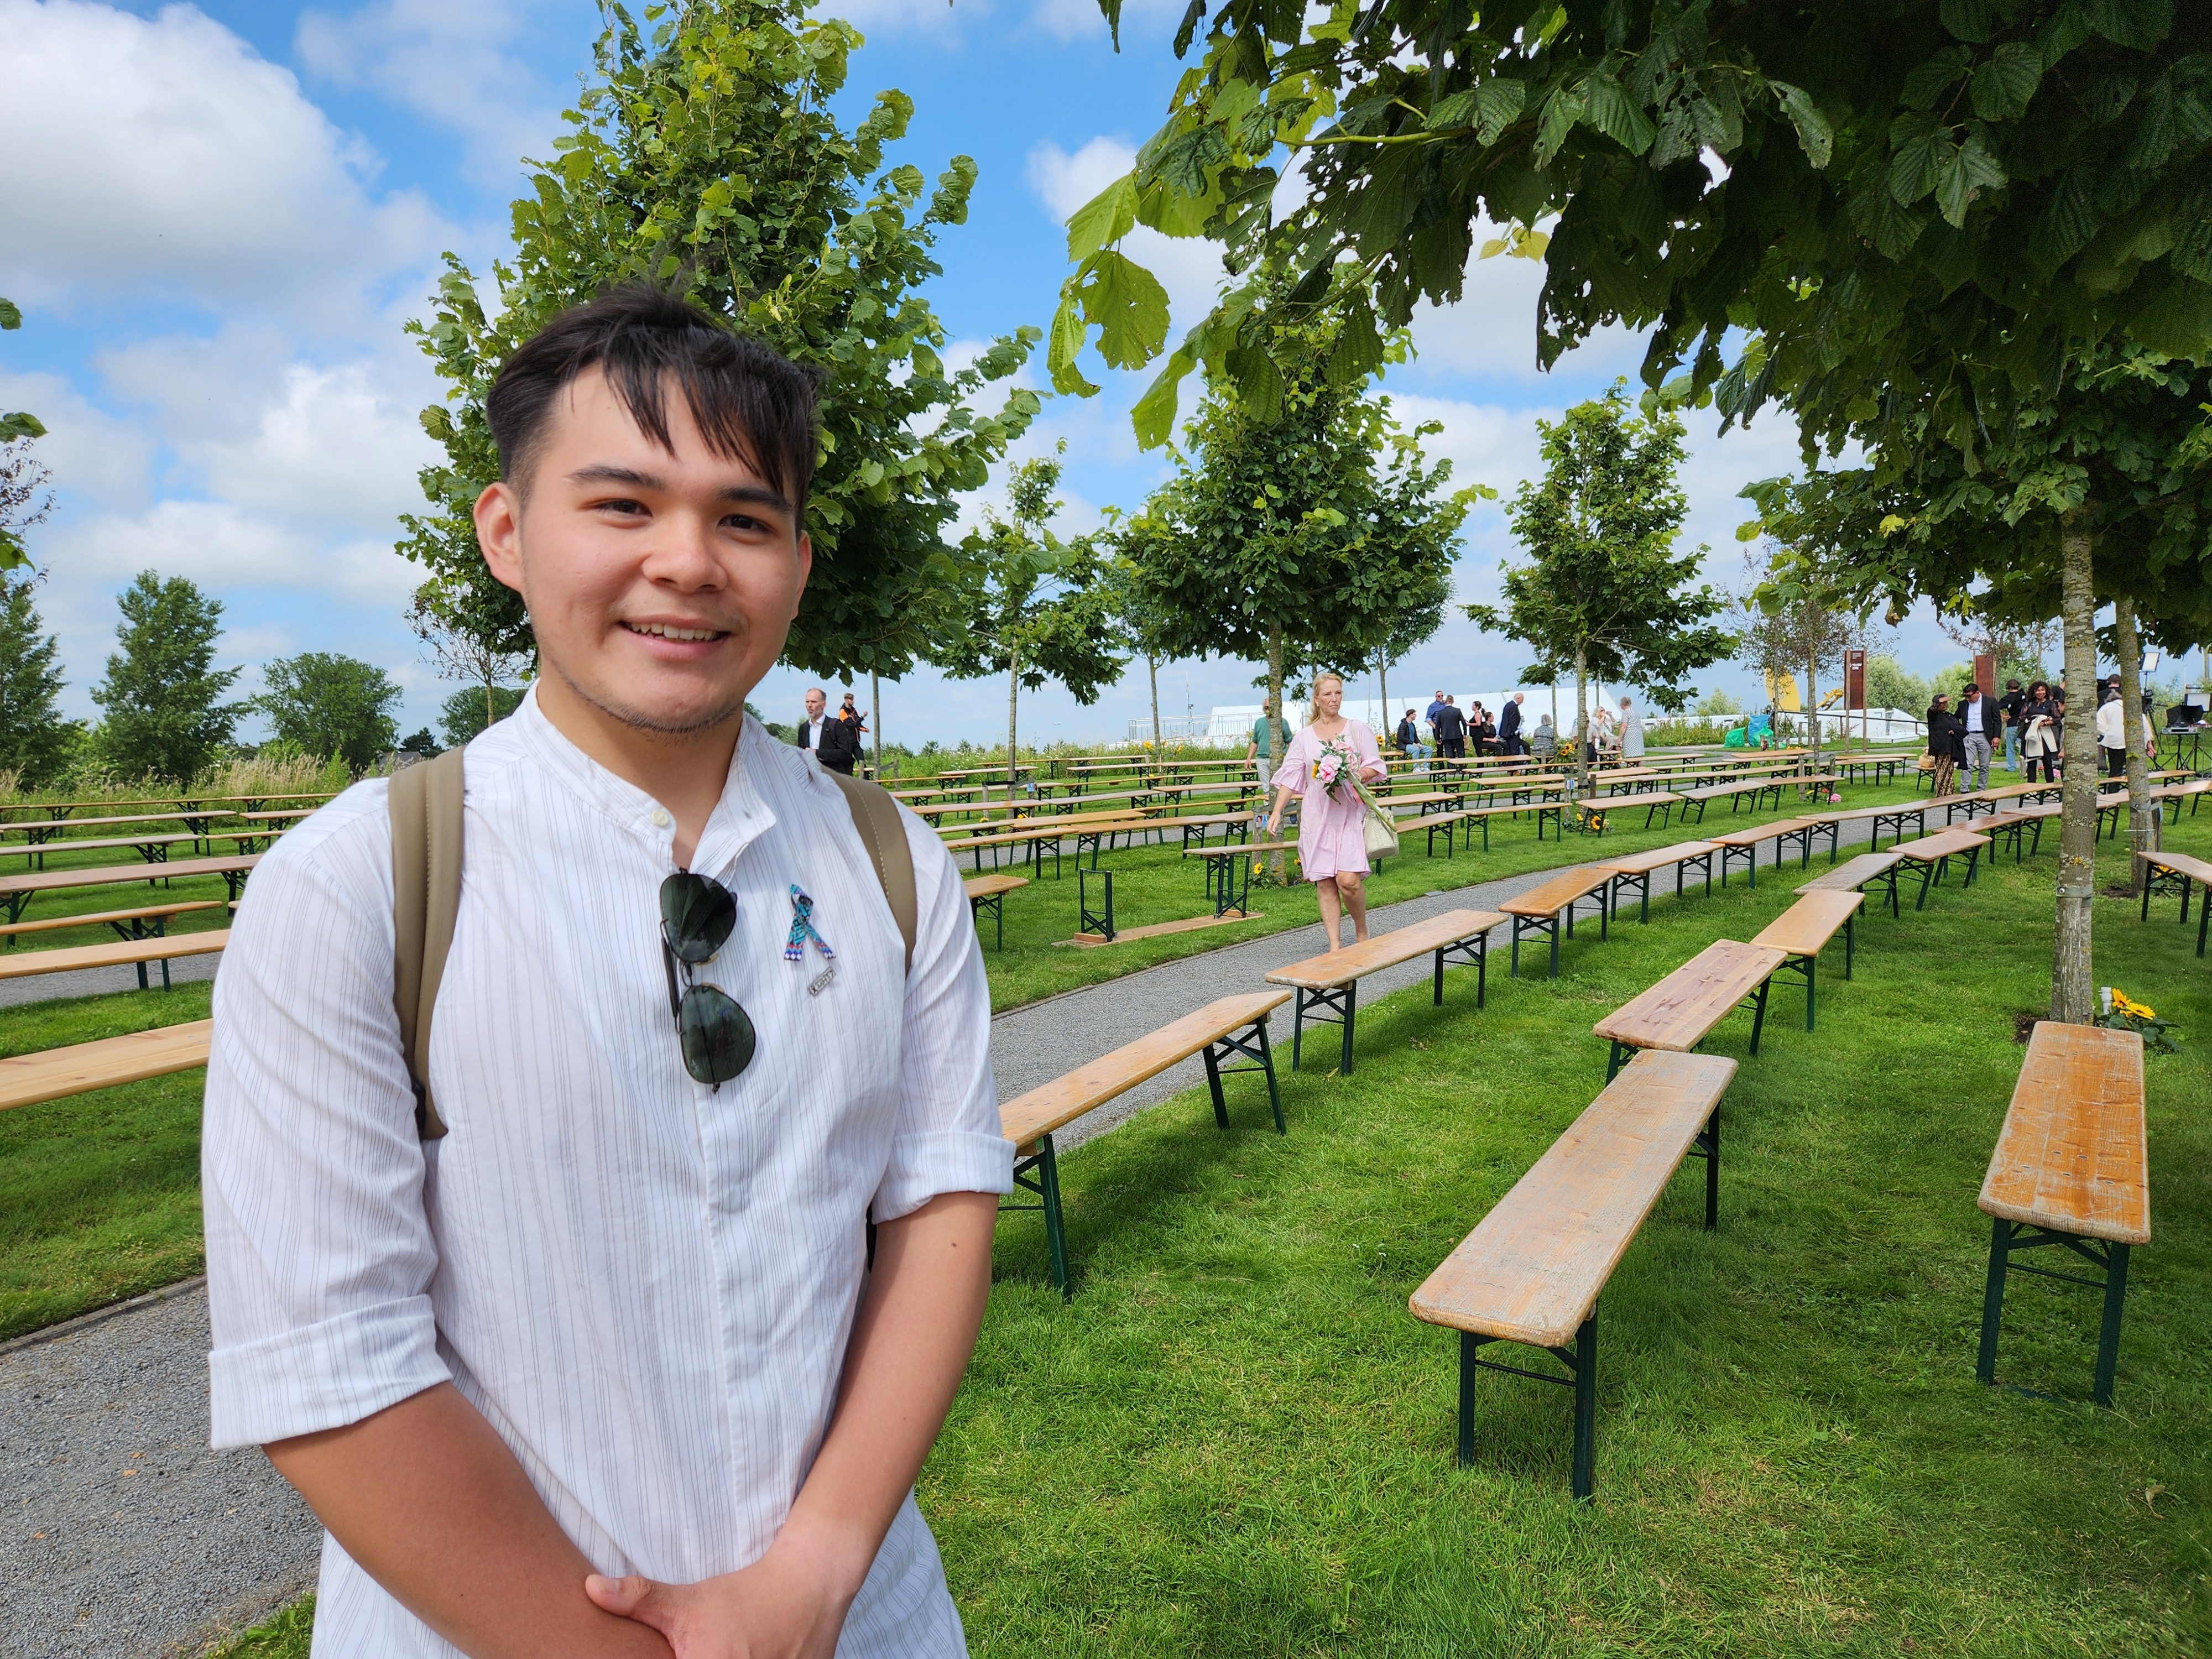 Scot Choo, a 21-year-old Malaysian, attends a memorial service for the victims of the ill-fated Malaysia Airlines MH17 flight, including his pilot-father Eugene Choo, held at Vijfhuizen Park, the Netherlands on July 17. Photo: Amy Chew